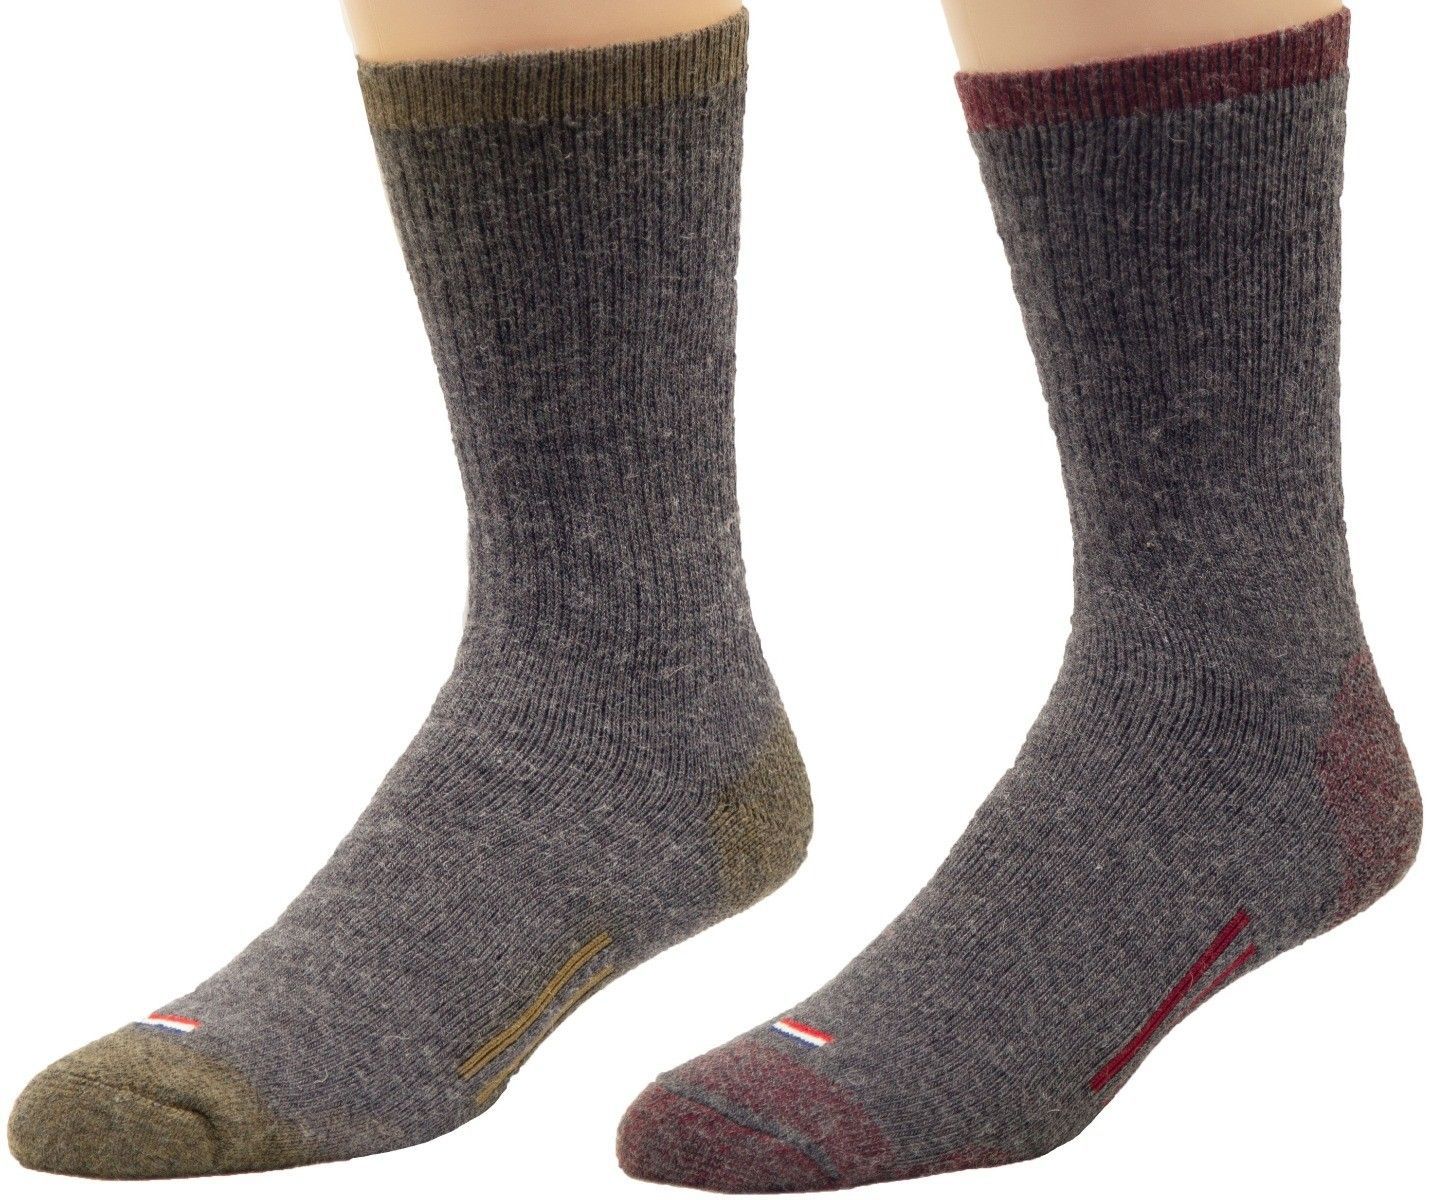 Made in America Socks -  Wool Blend Crew - 2 Pair Pack - Shoe Size - 6 to 14 - $19.95